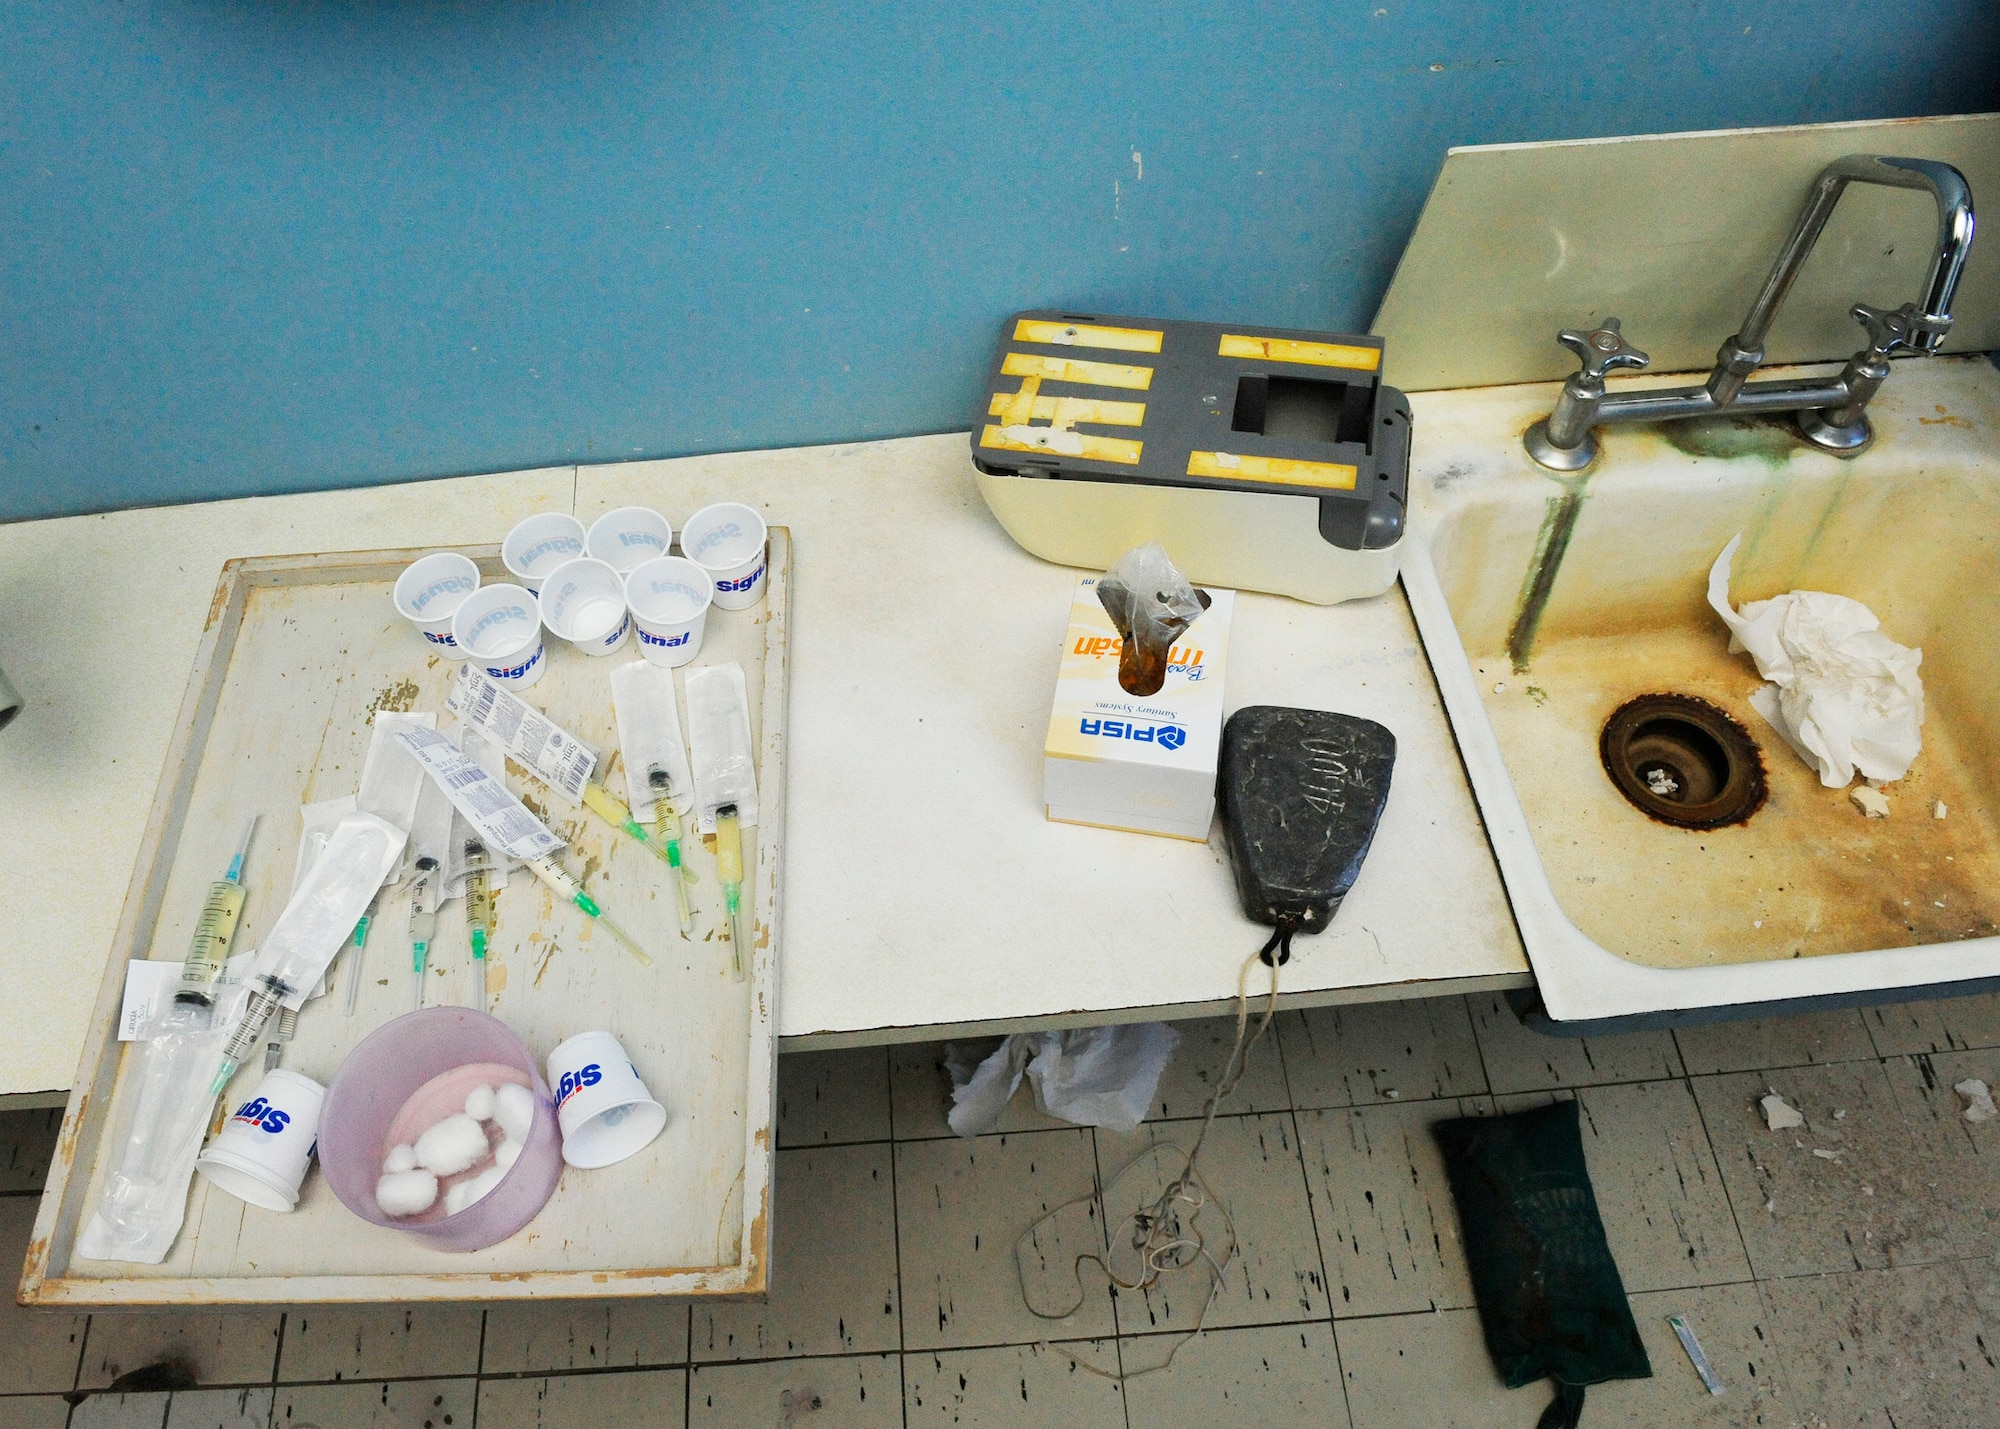 Syringes and medication are untouched March 12, 2010, in a regional hospital in Angol, Chile. The hospital was rendered structurally unsound by an 8.8 earthquake that occurred Feb. 27, 2010. With the nearest operation ward more than 40 miles away, and many other local hospitals overwhelmed with casualties following the earthquake, local Chilean officials requested assistance from U.S. forces to help with primary care capabilities. (U.S. Air Force photo/Senior Airman Tiffany Trojca)